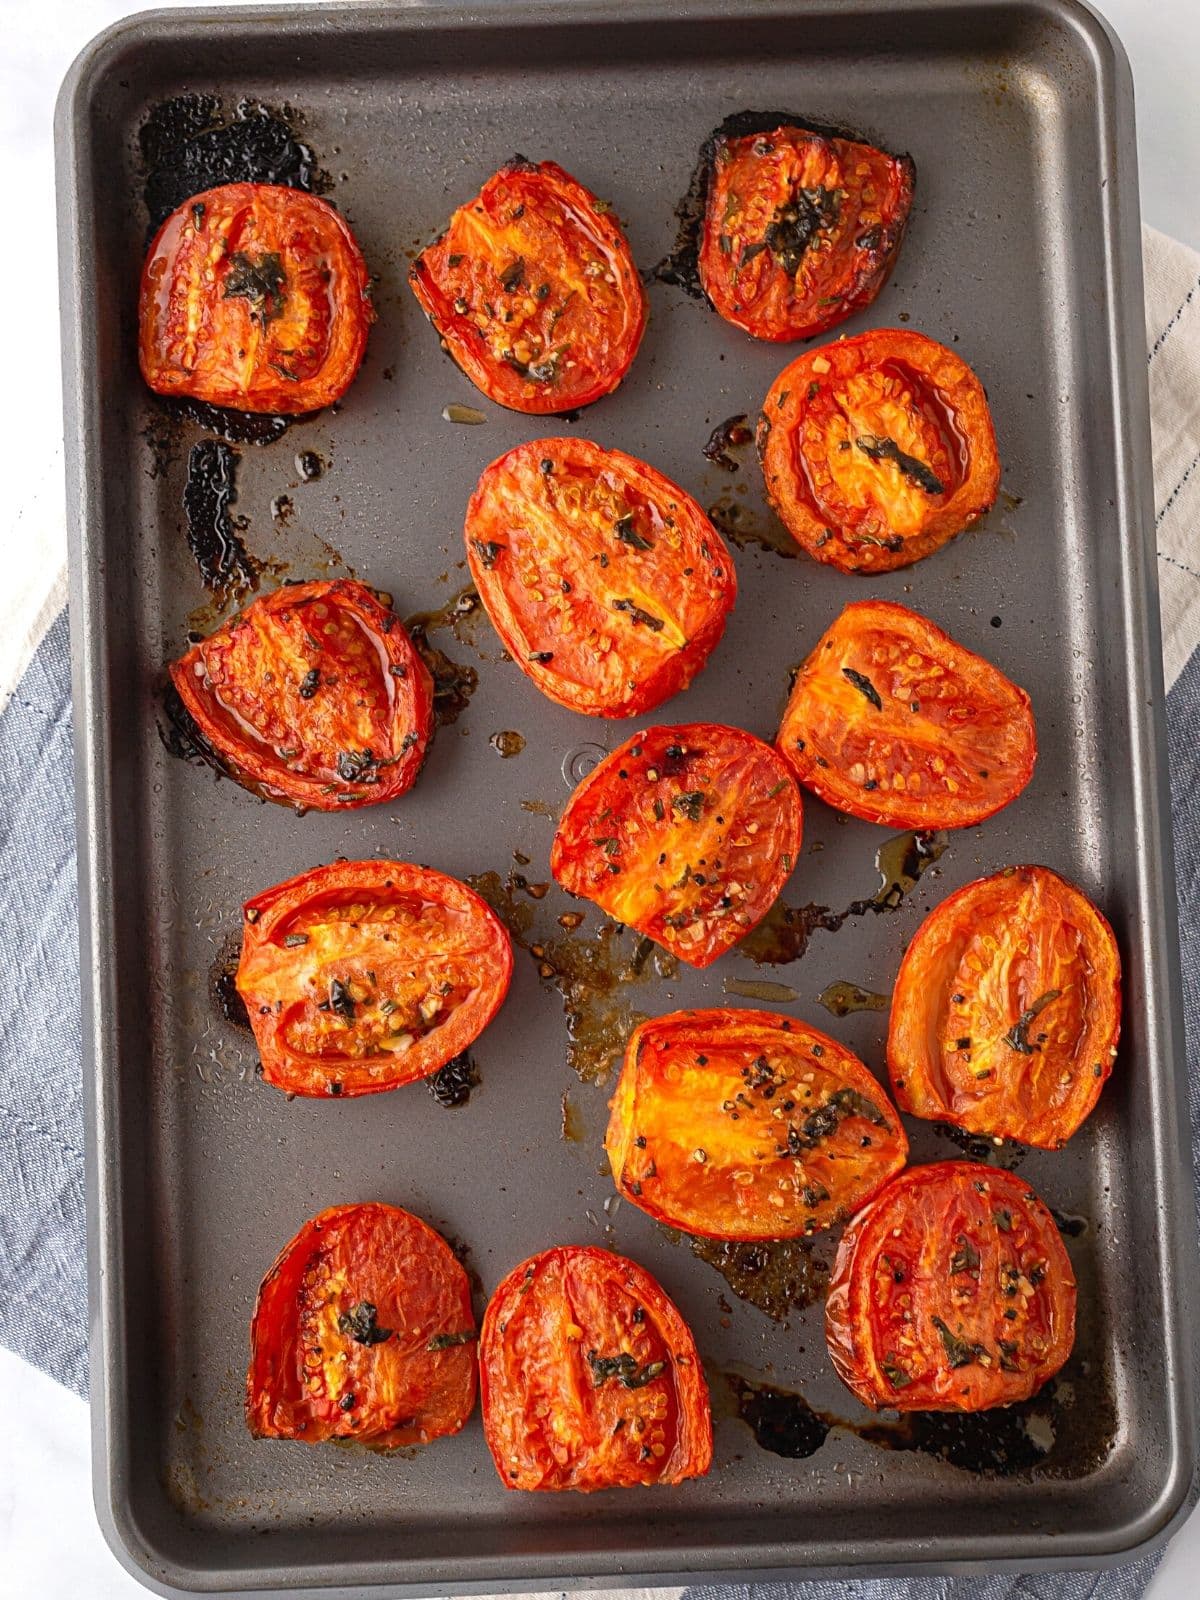 Roasted tomatoes out of the oven.